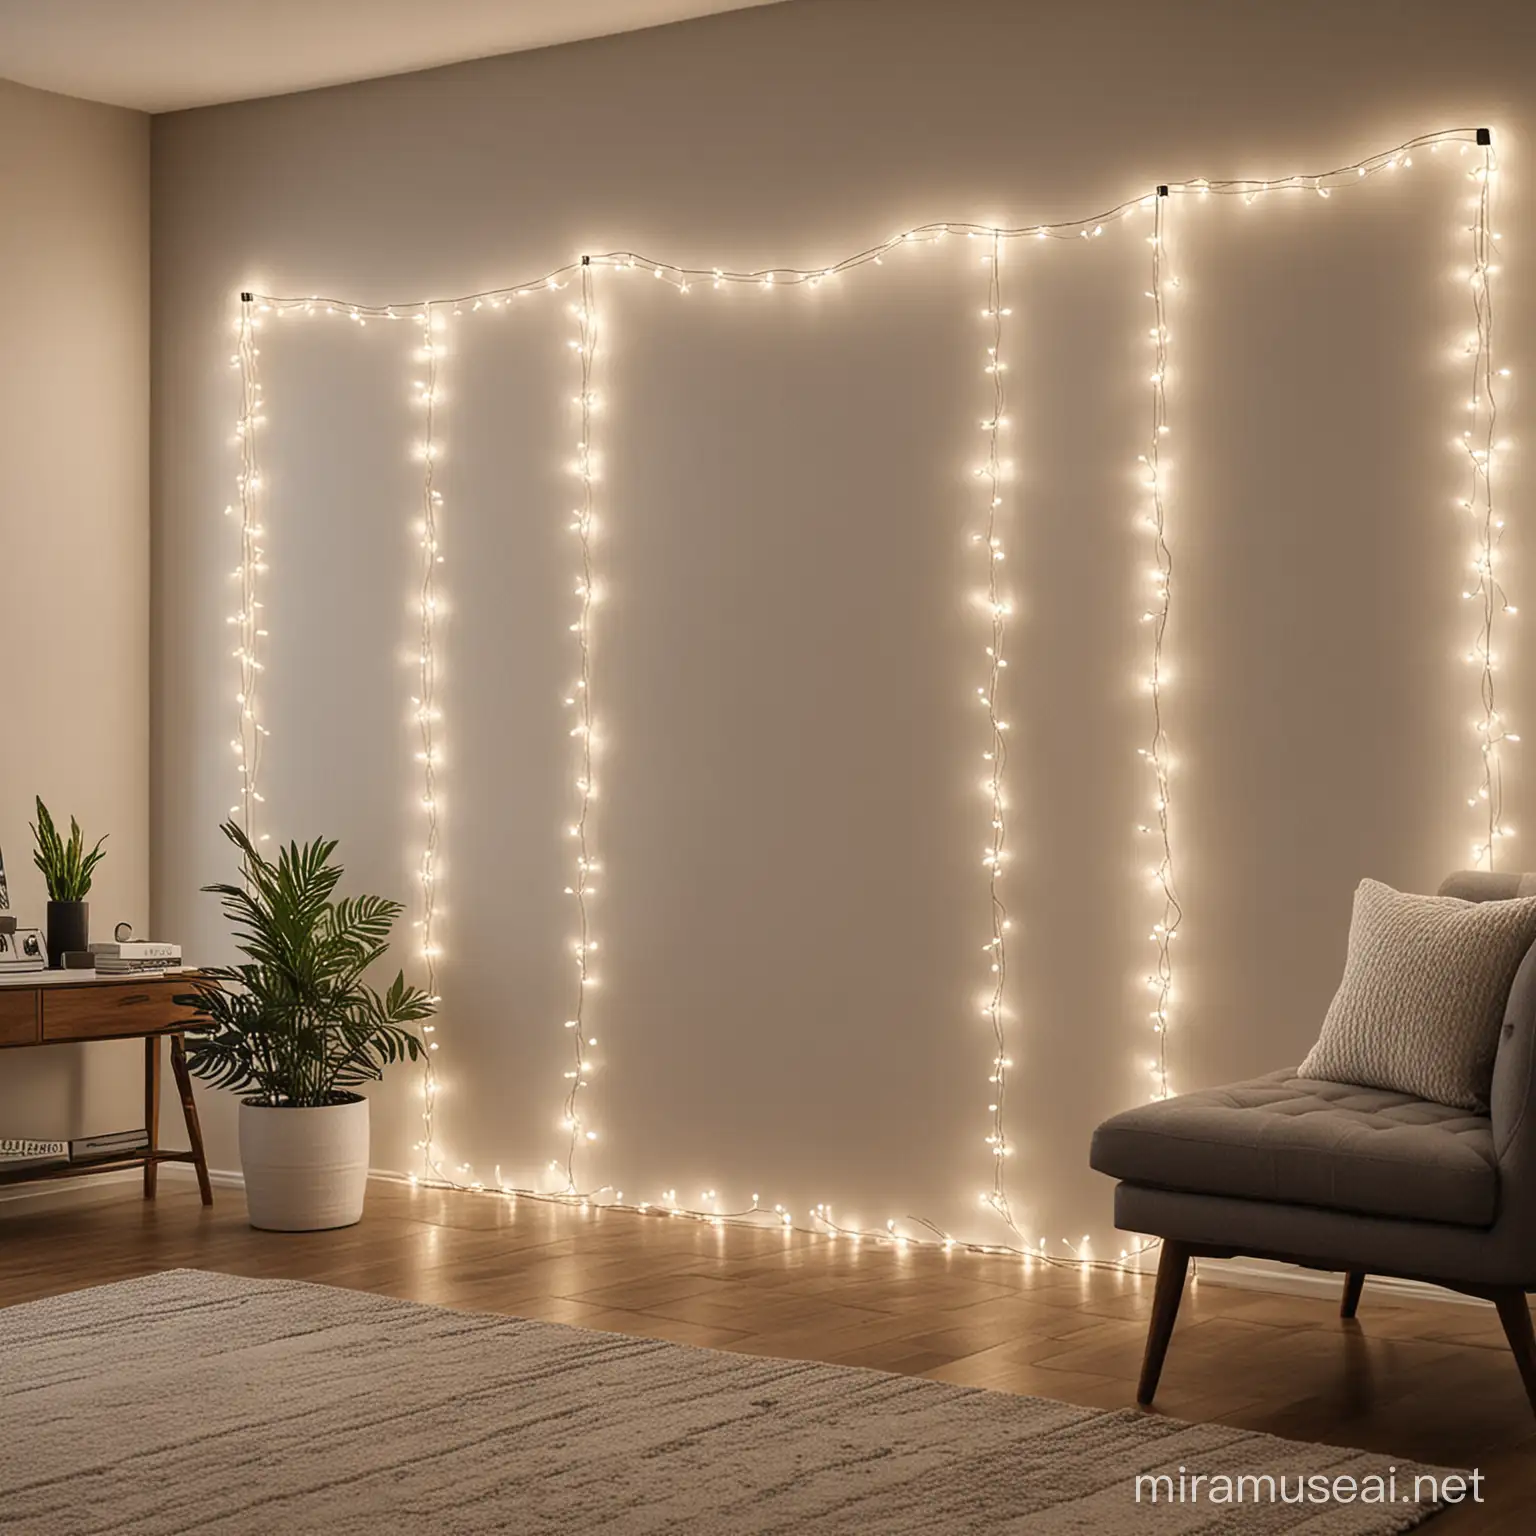 Contemporary Interior with LED String Lights